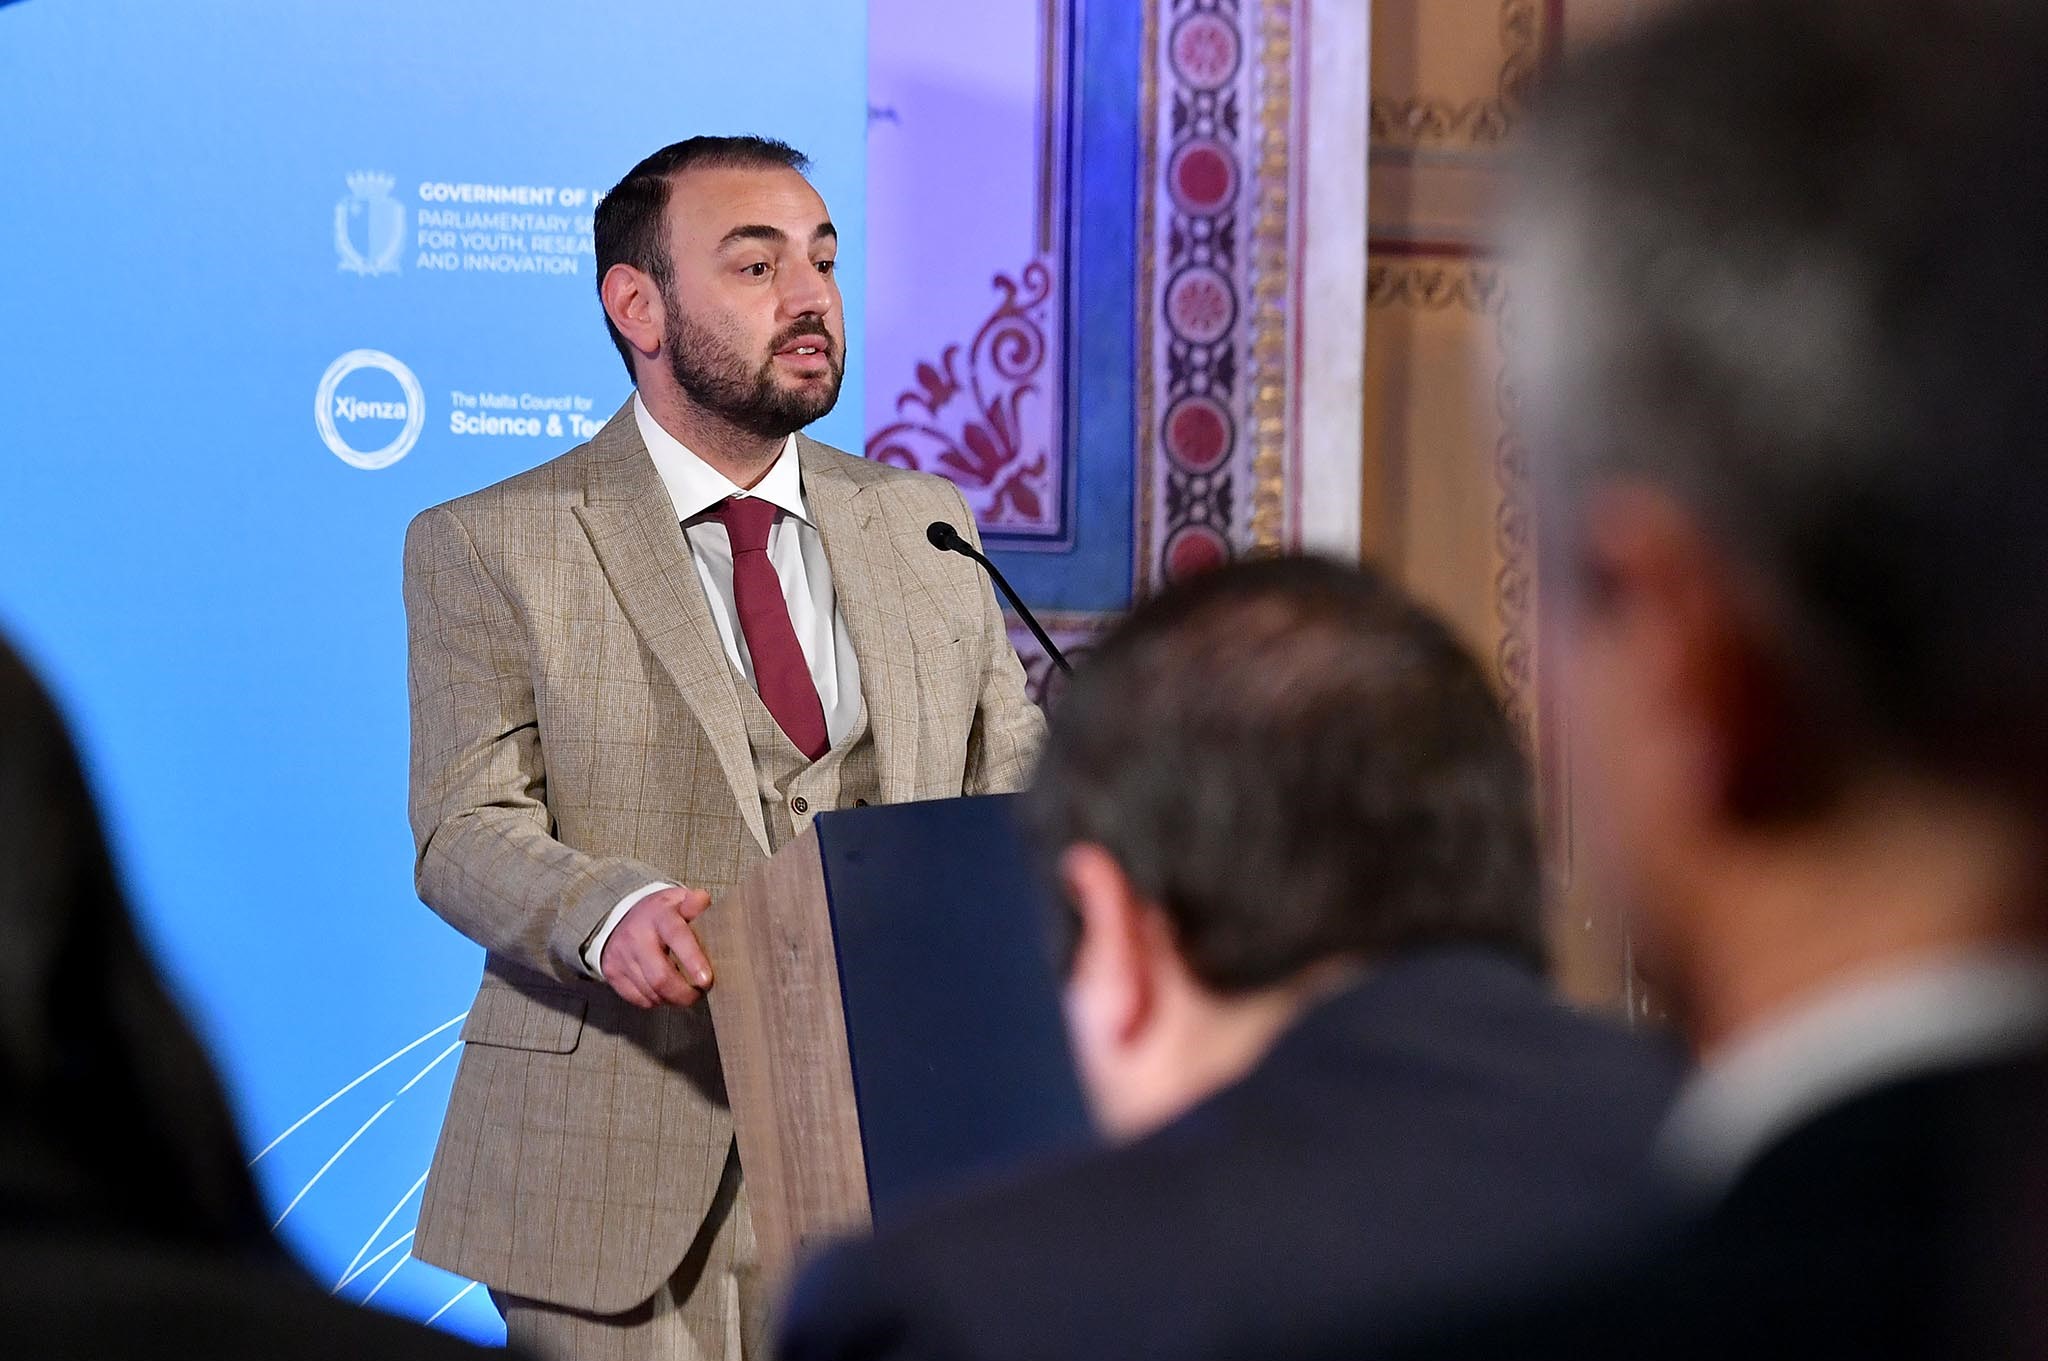 Parliamentary Secretary for Youth, Research and Innovation Keith Azzopardi Tanti launches a public consultation on the Research and Innovation Strategic Plan 2023-2027 Museum of Archaeology, Valletta